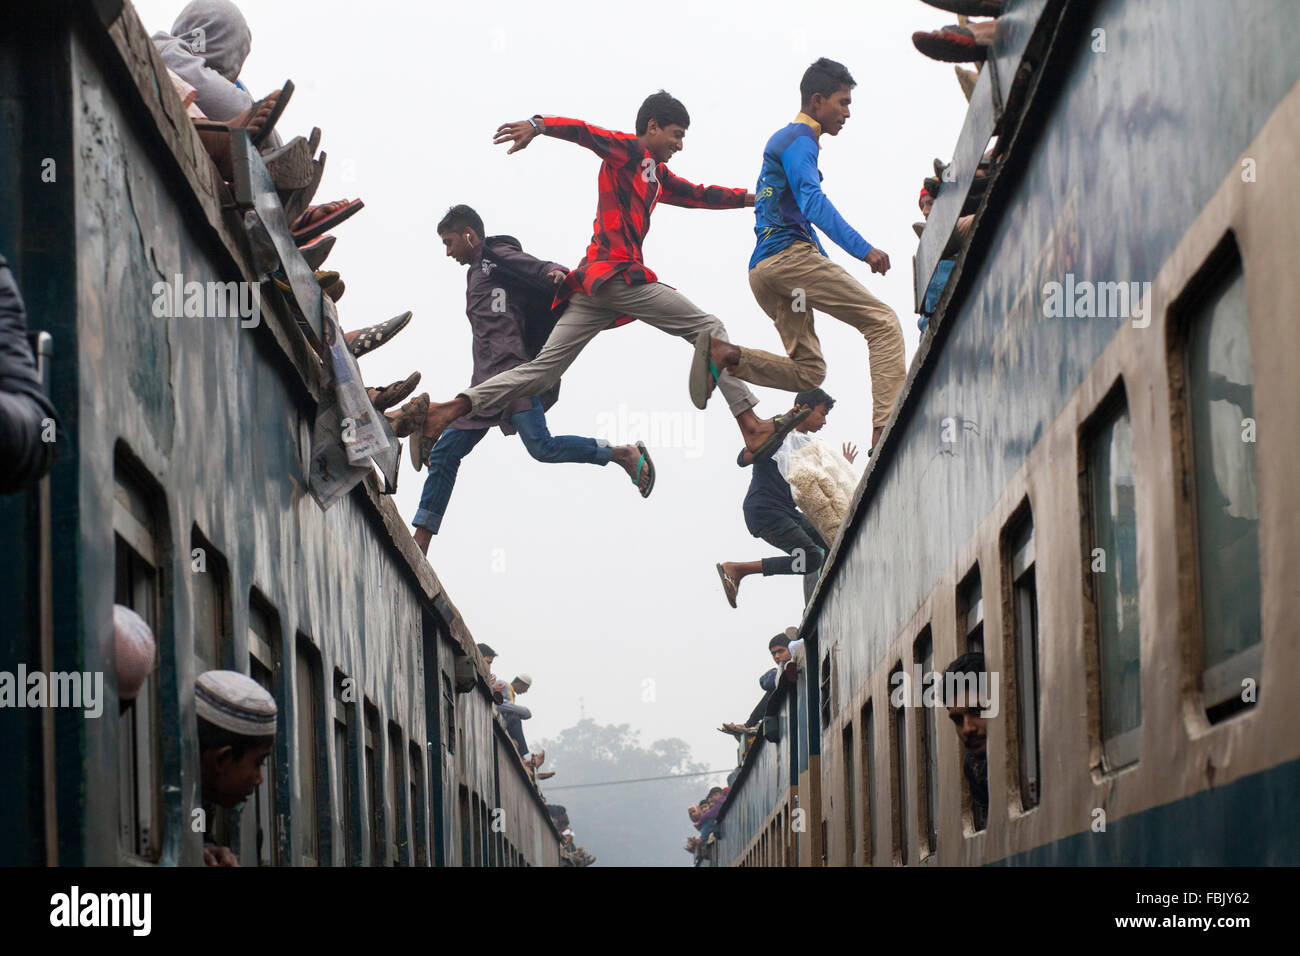 DHAKA, BANGLADESH 10th January 2016: People jumping over crowded train they attend the Akheri Munajat concluding prayers on the third day of Biswa Ijtema, the second largest Muslim congregation after the Hajj, at Tongi Railway station in Tongi 20 km from Dhaka on January 10, 2016. Around two million Muslims from Bangladesh and abroad observed the three-day congregation with prayers on the banks of the Turag River. Stock Photo